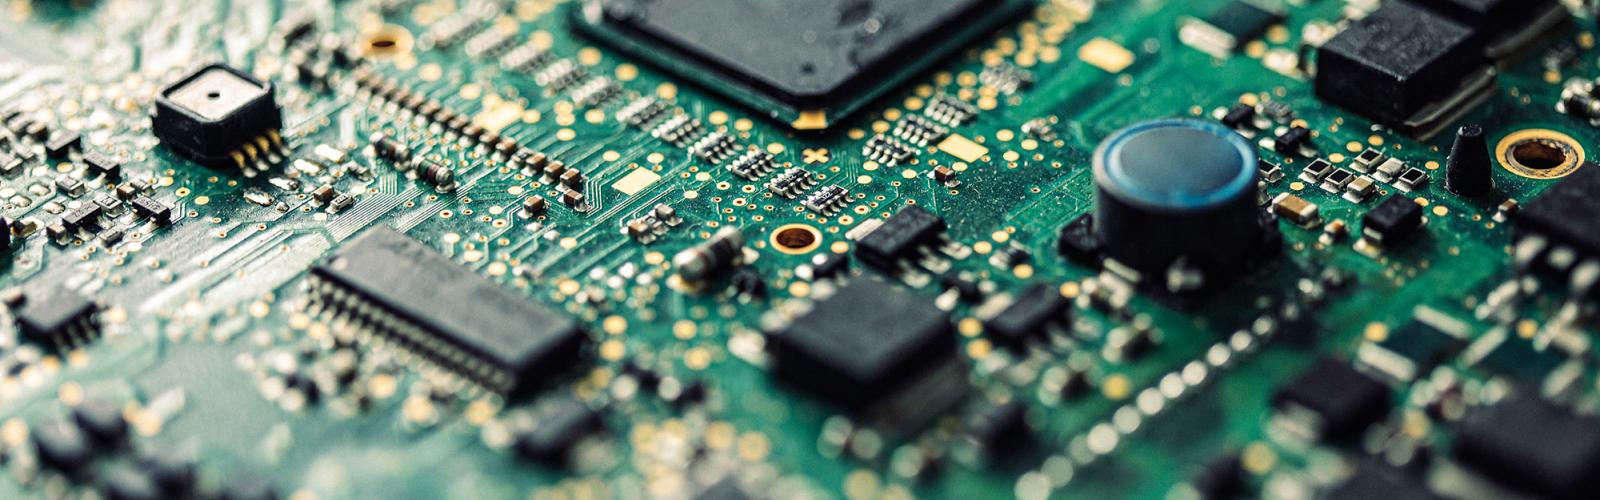 A close up of a circuit board